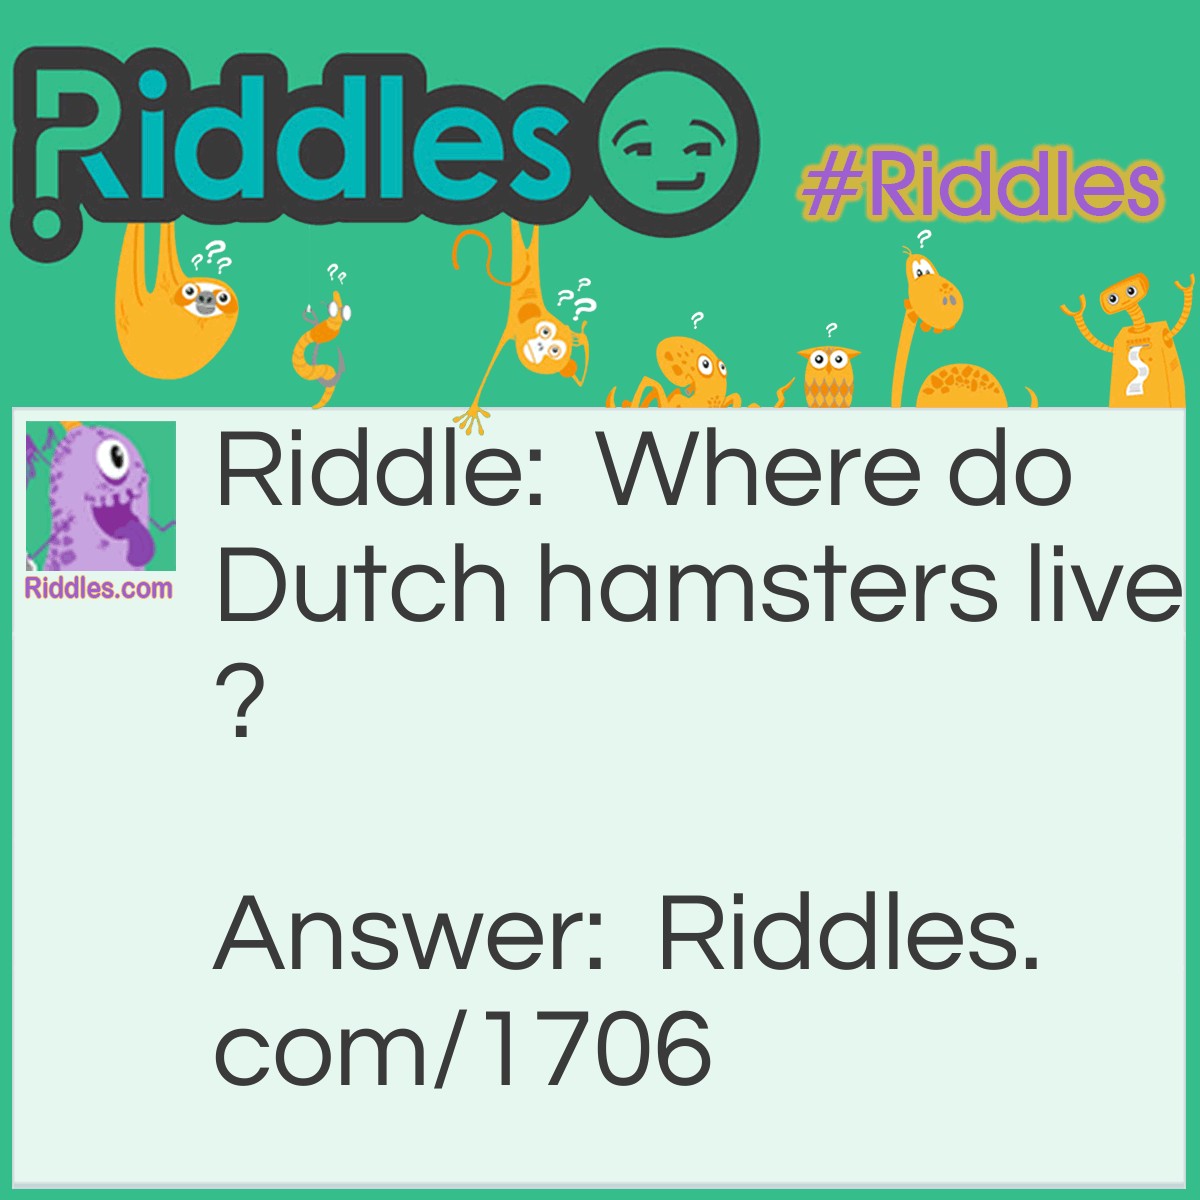 Riddle: Where do Dutch hamsters live? Answer: In Ham-sterdam.